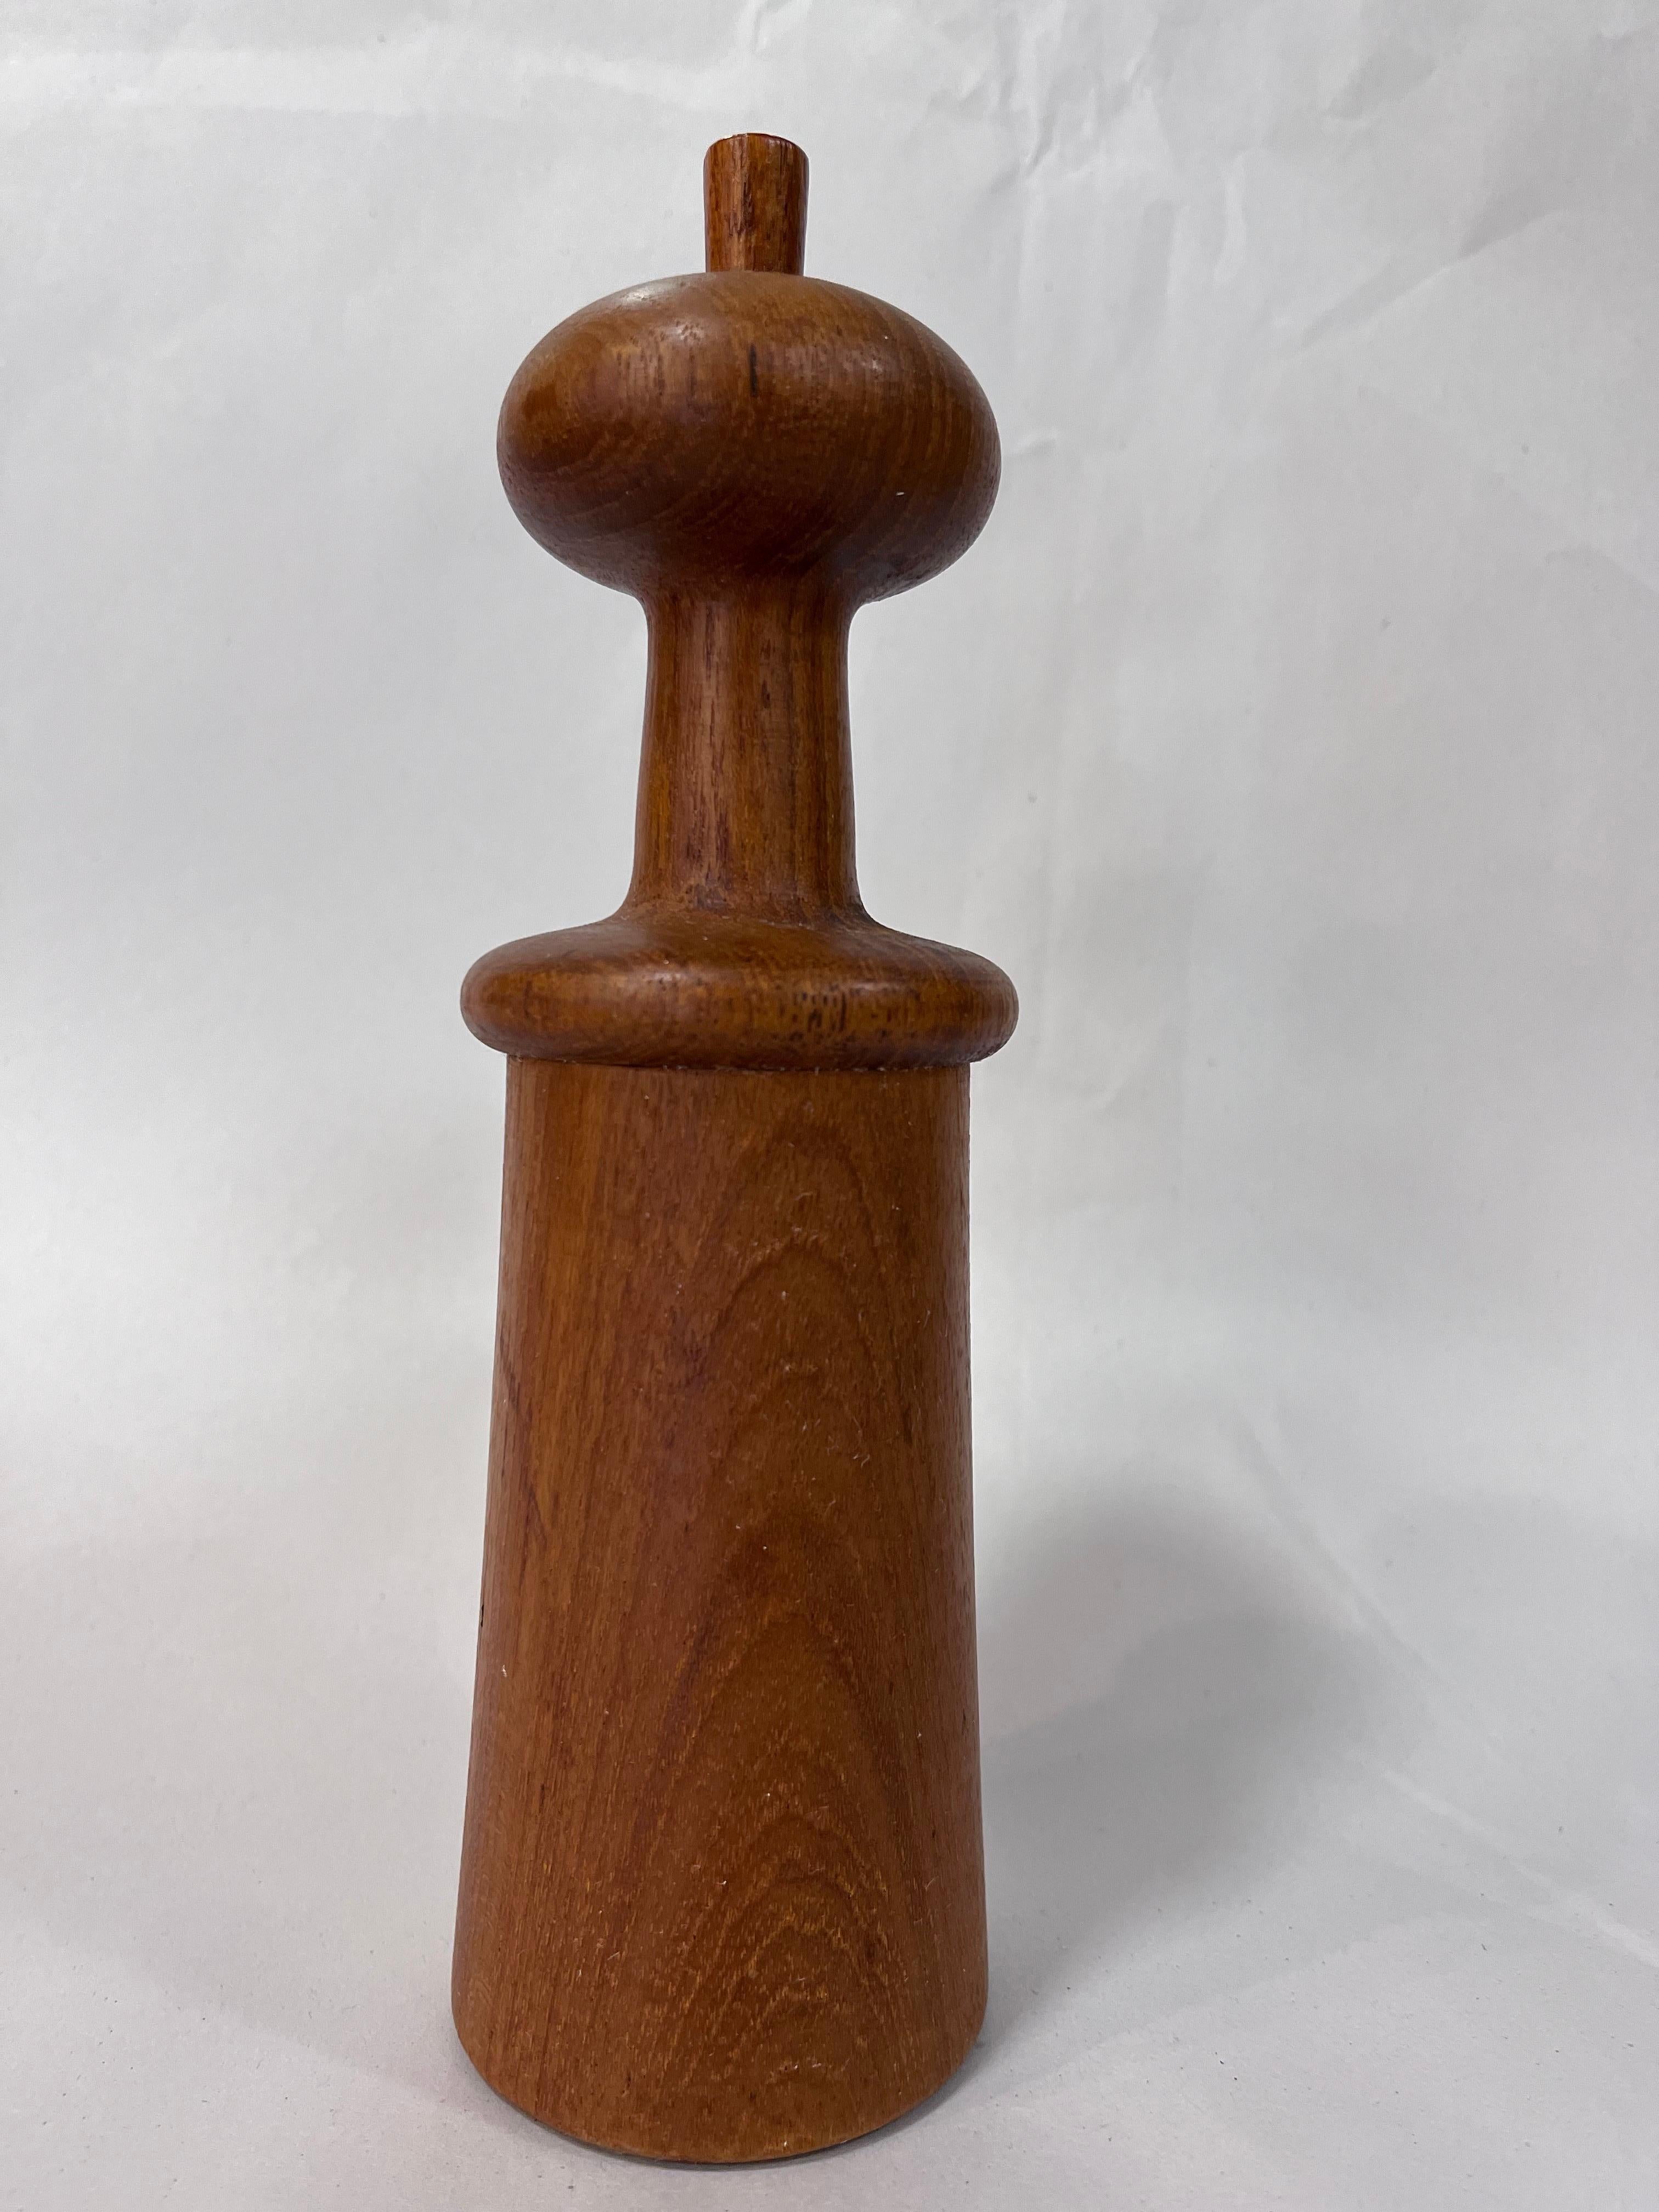 A vintage Danish modern pepper mill and salt shaker in teak designed by Jens Harald Quistgaard for Dansk. This exercise in simplicity and good design features a bulbous top with removable stopper (to insert the salt) for your salt shaking and flavor